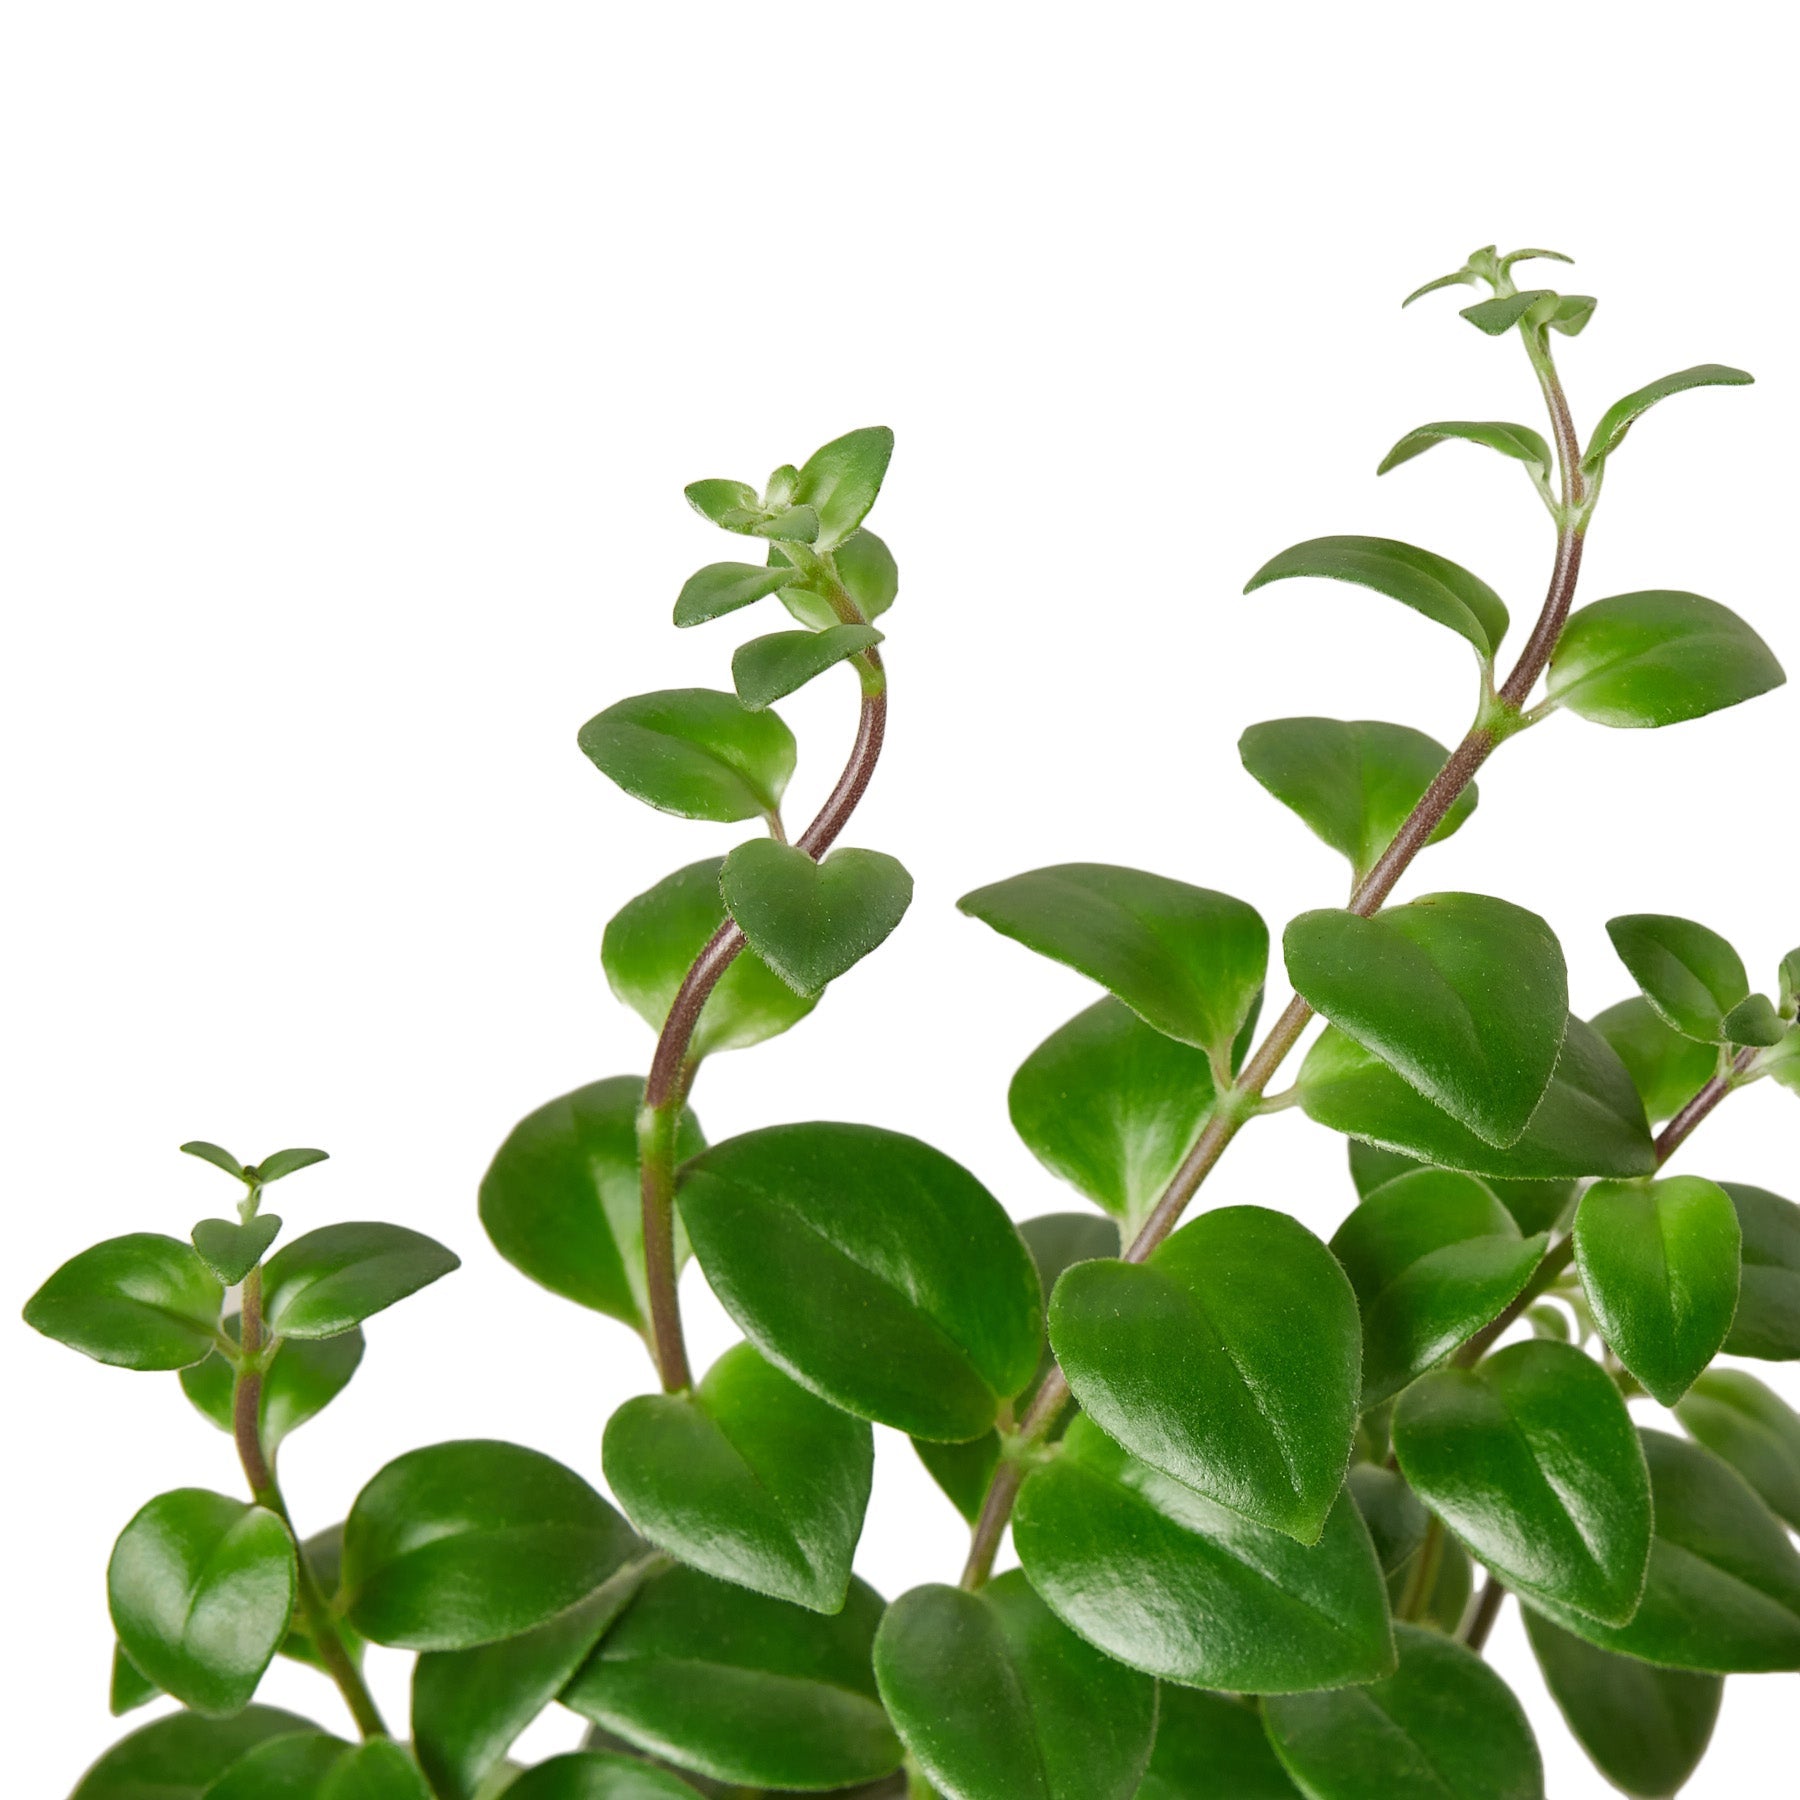 A vibrant plant with green leaves on a white background.